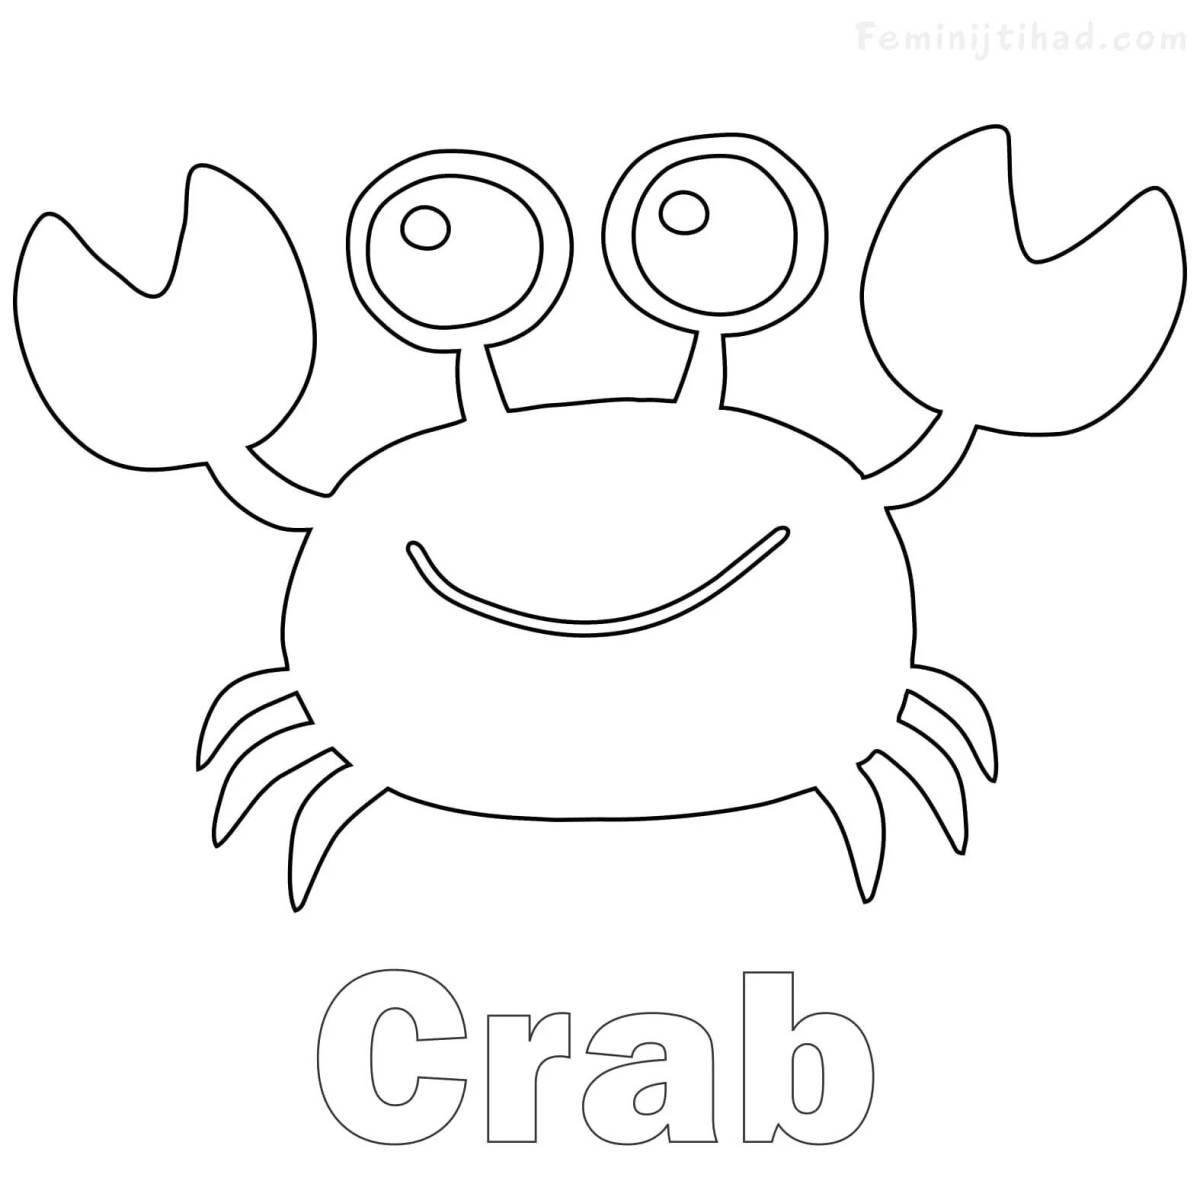 Crab captain coloring page